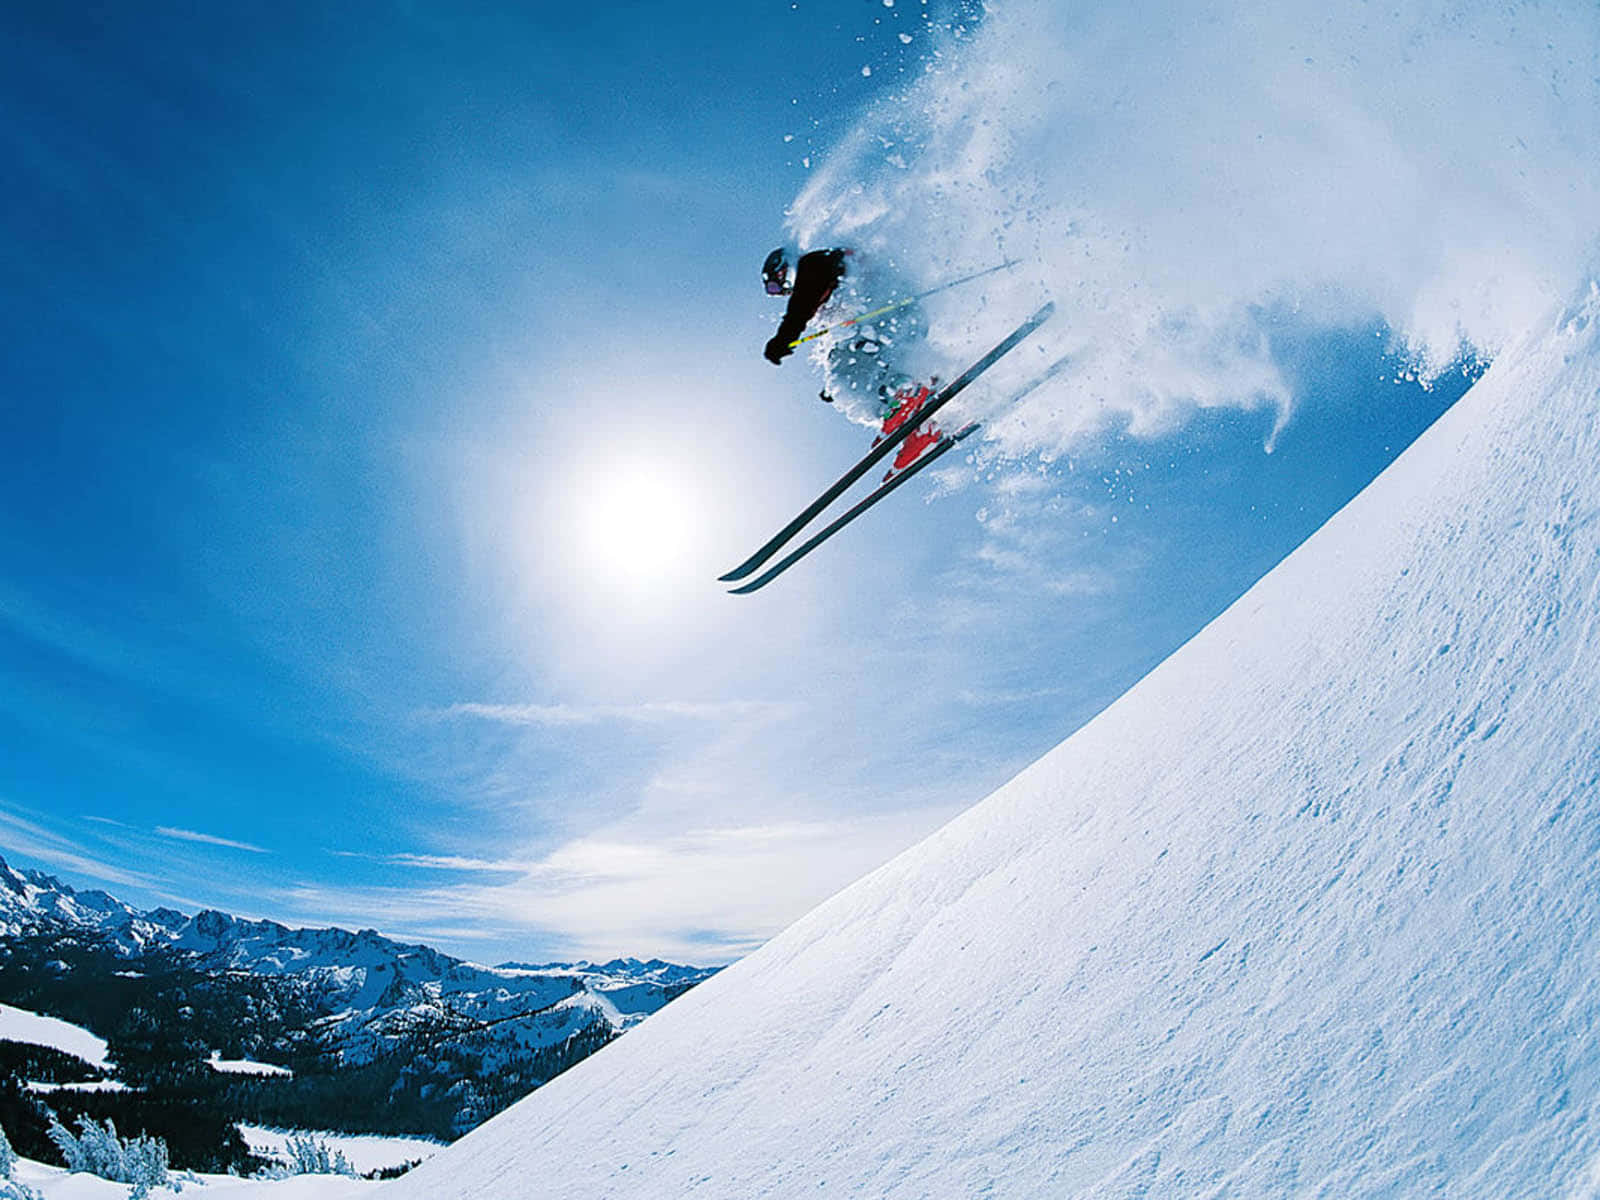 Take to the slopes this winter for an exhilarating ski adventure!